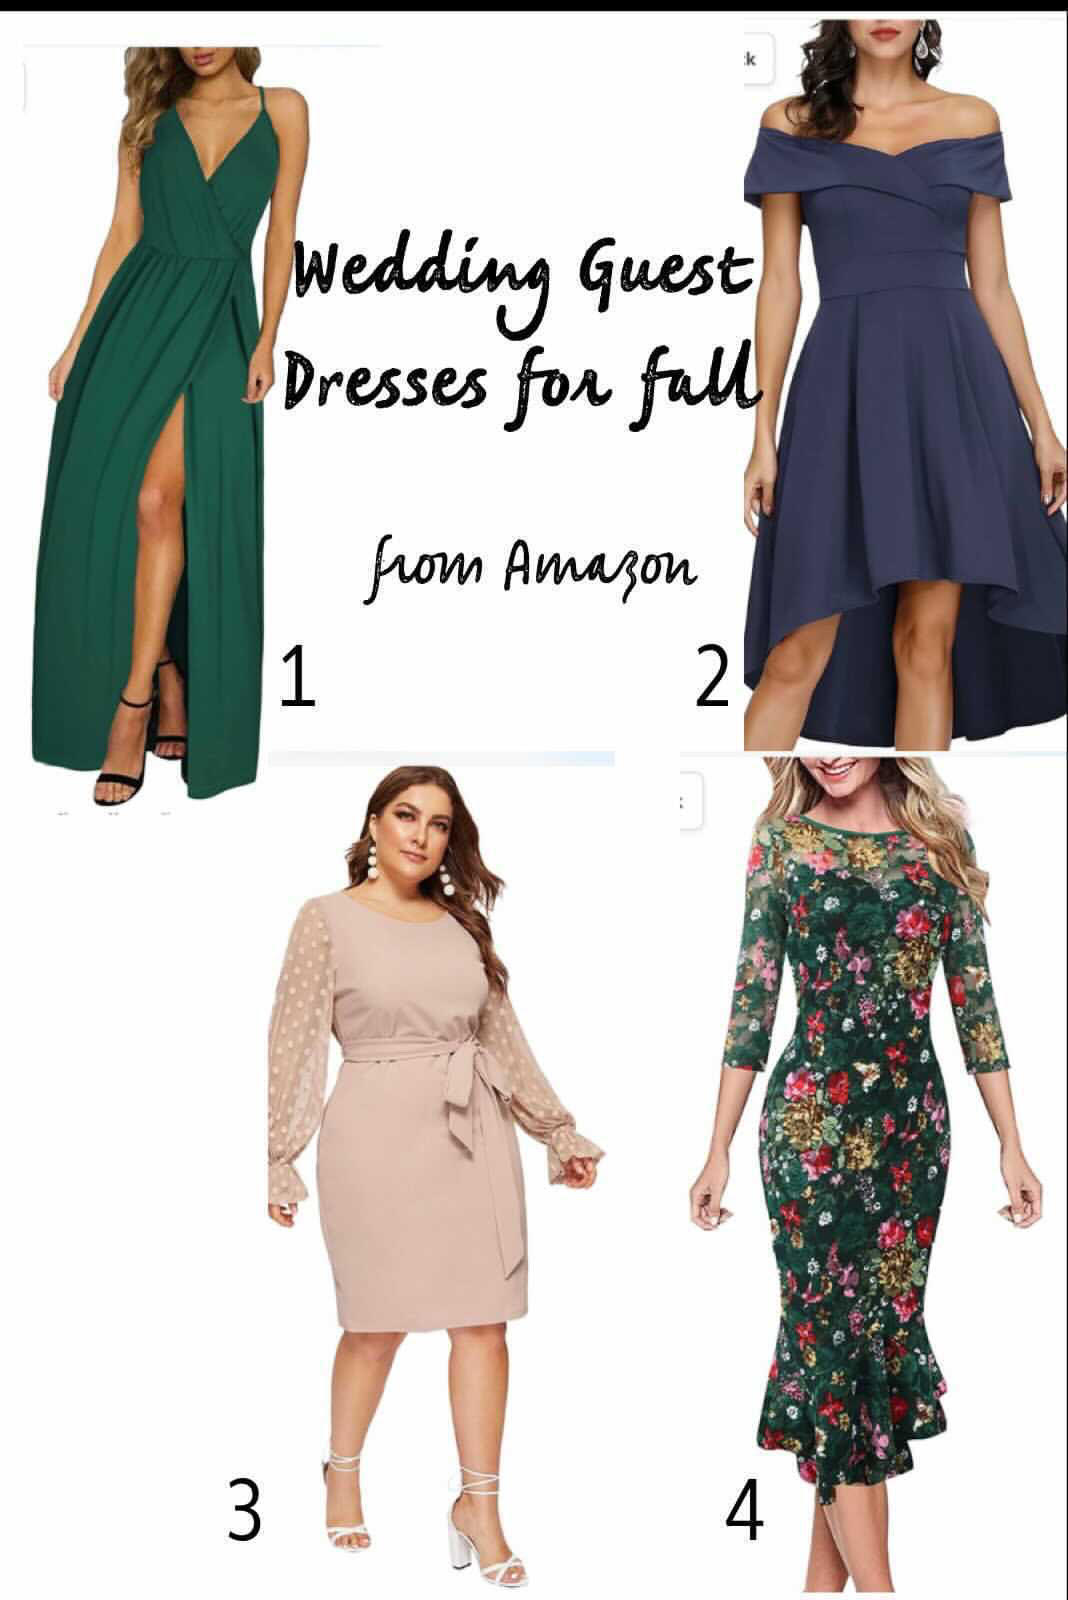 Fall Wedding Guest Dresses - 50 Shades of Style